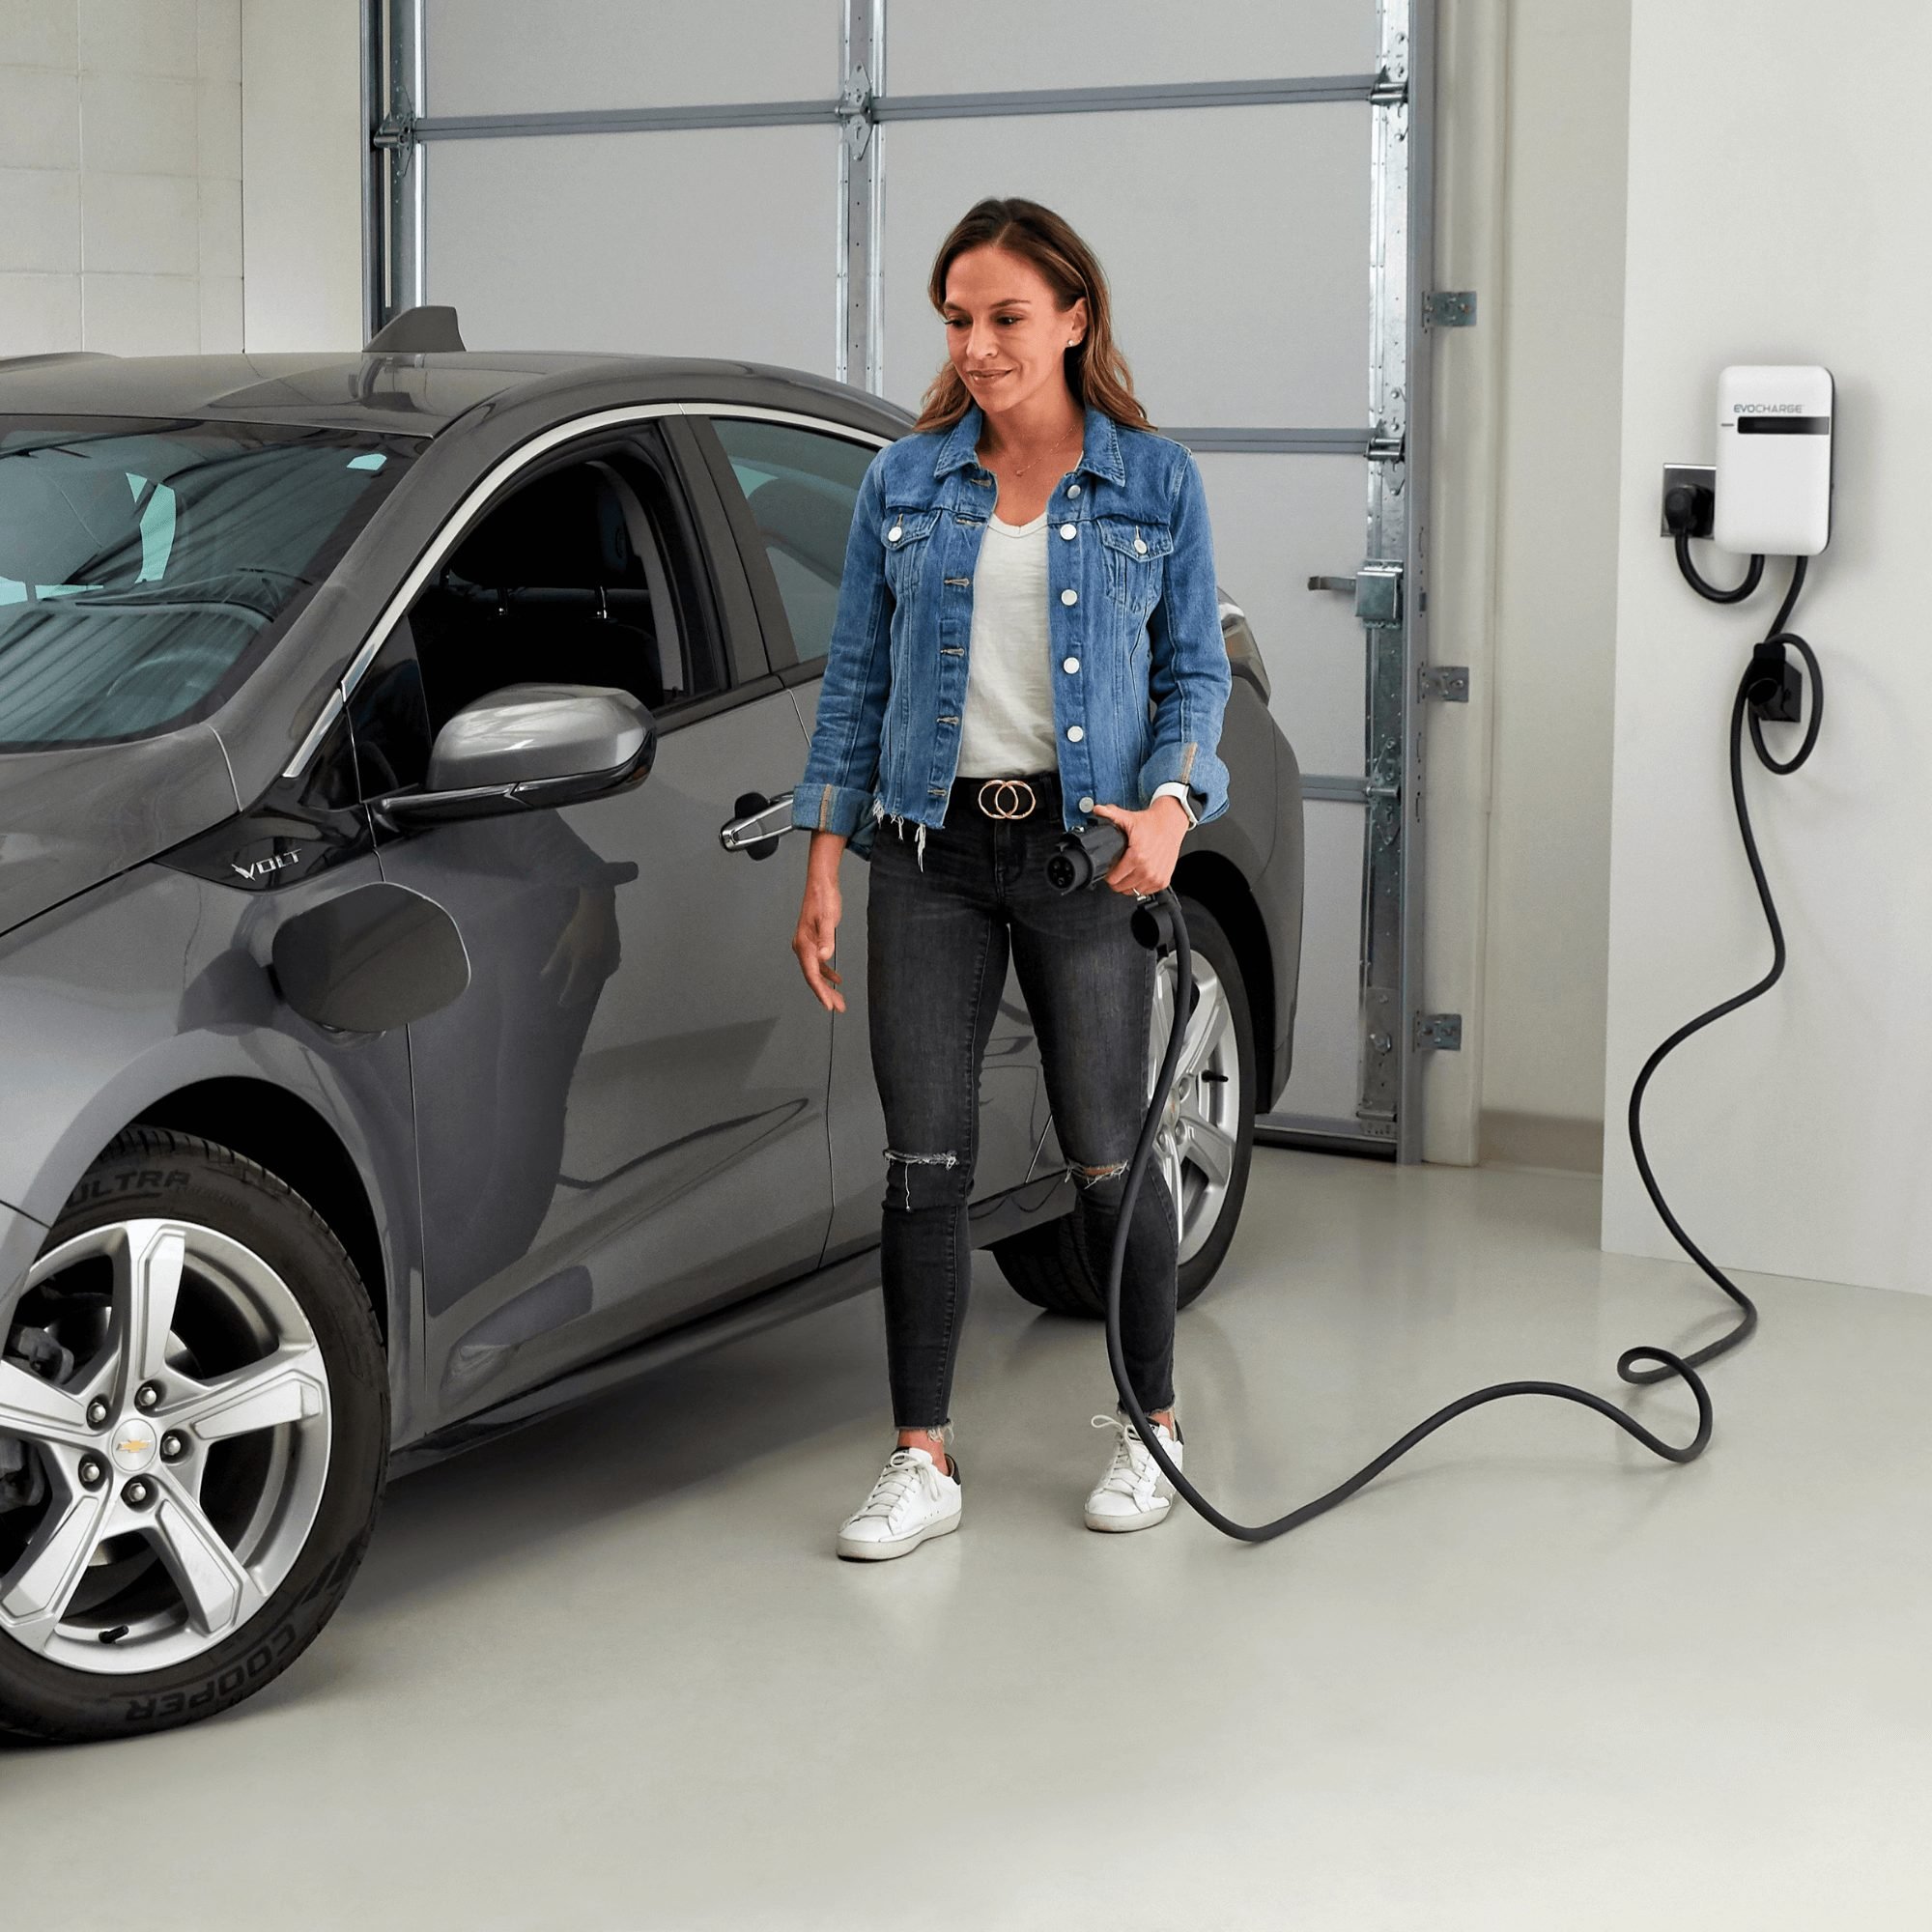 A woman in a jean jacket moving to plug in her electric vehicle in a garage